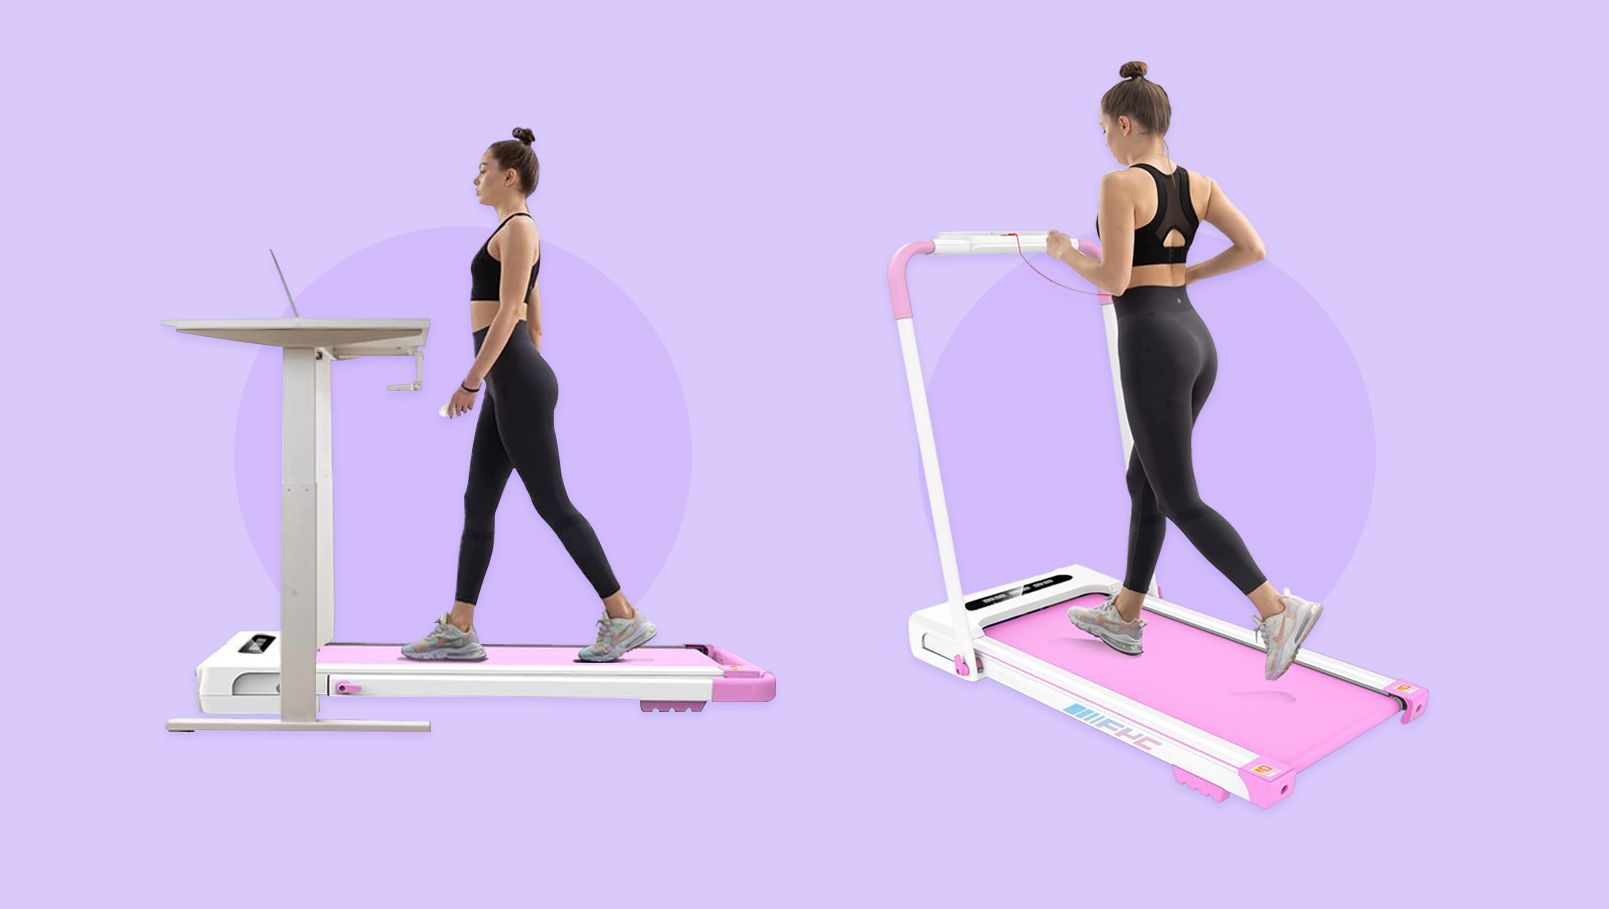 CHEAP ELECTRIC TREADMILLS These Are The BEST🔥 